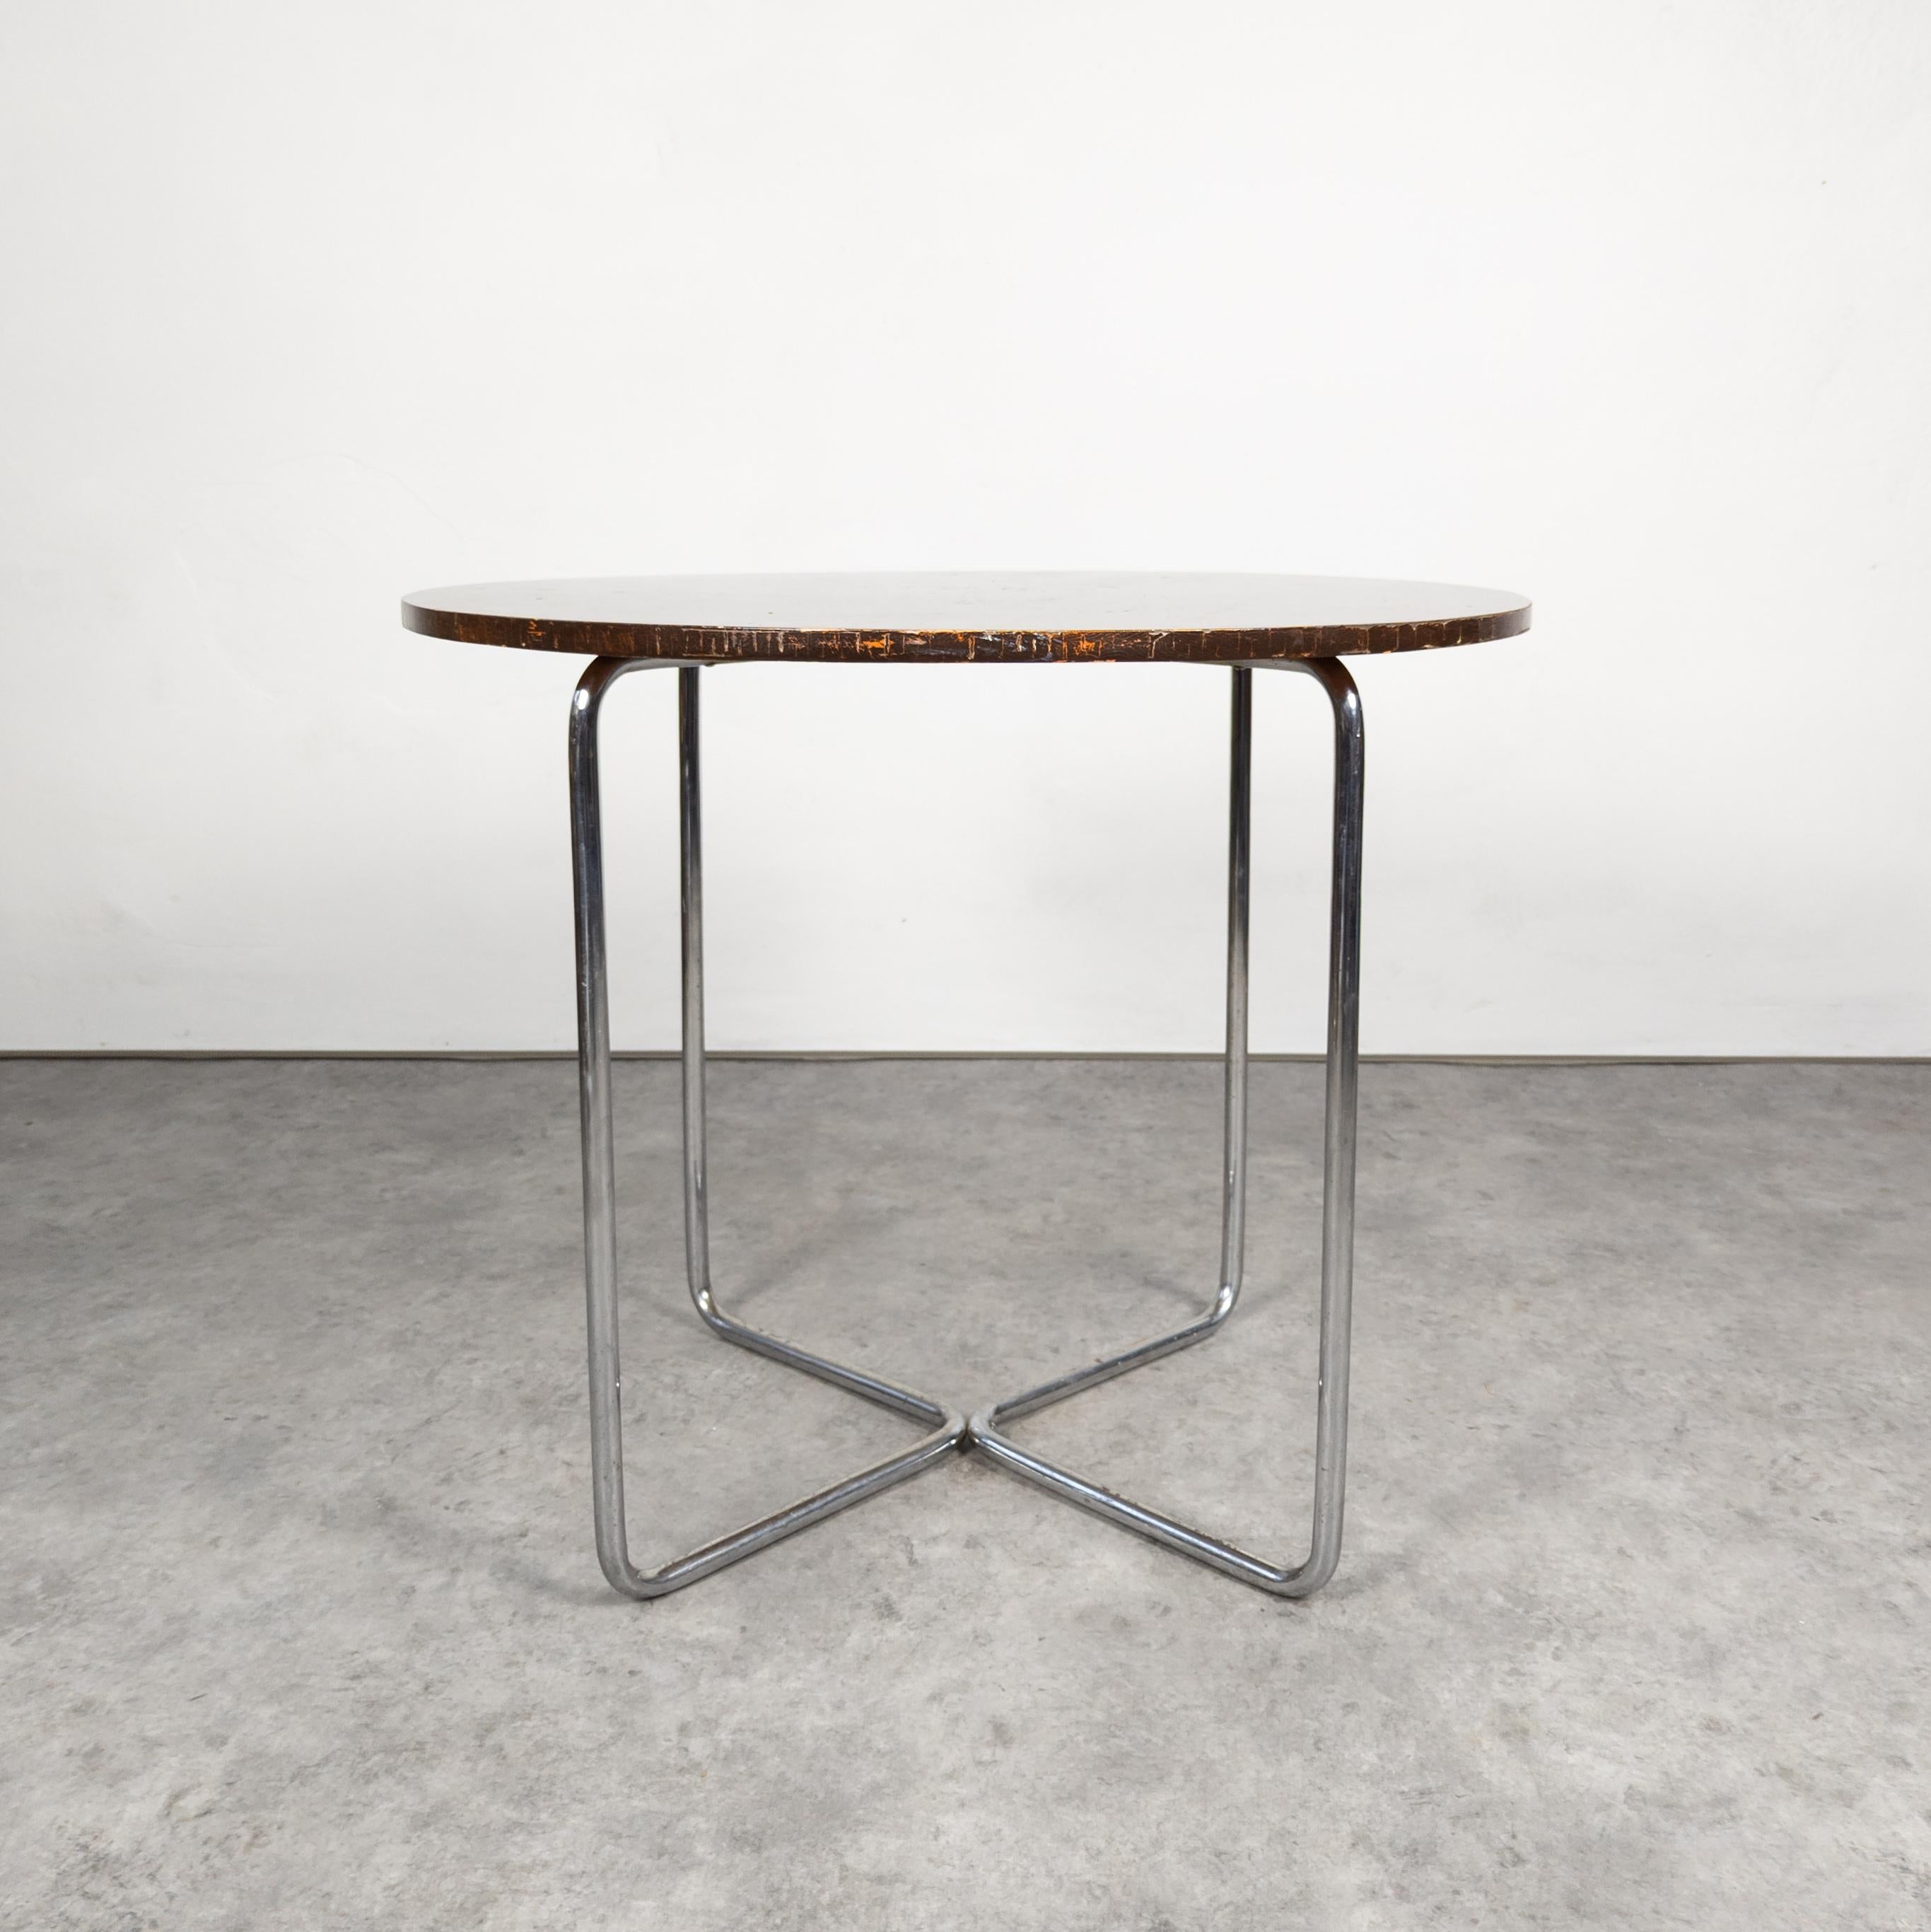 The Thonet B 27 table, designed by Marcel Breuer, is a minimalist and iconic piece. It features a sleek tubular steel frame with a glass or wooden circular tabletop, embodying the Bauhaus aesthetic of form following function. Its design emphasizes